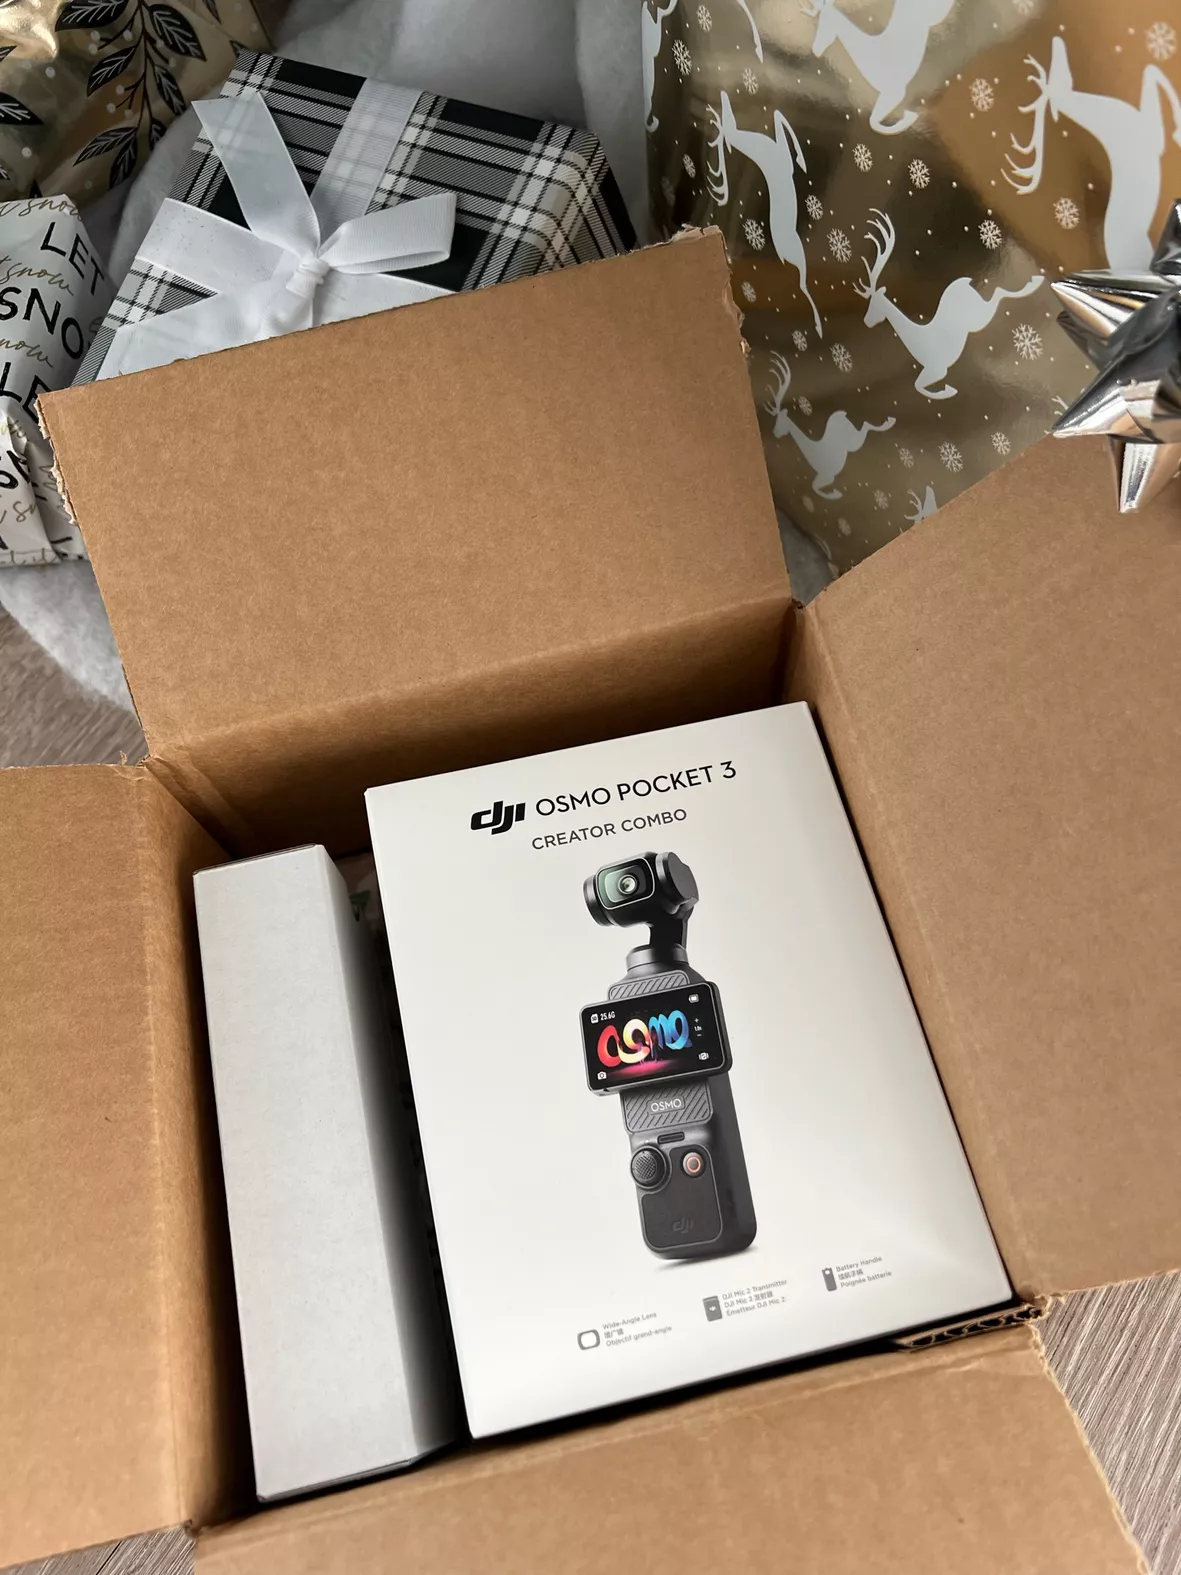 Unboxing the latest DJI Osmo Pocket 3 📸